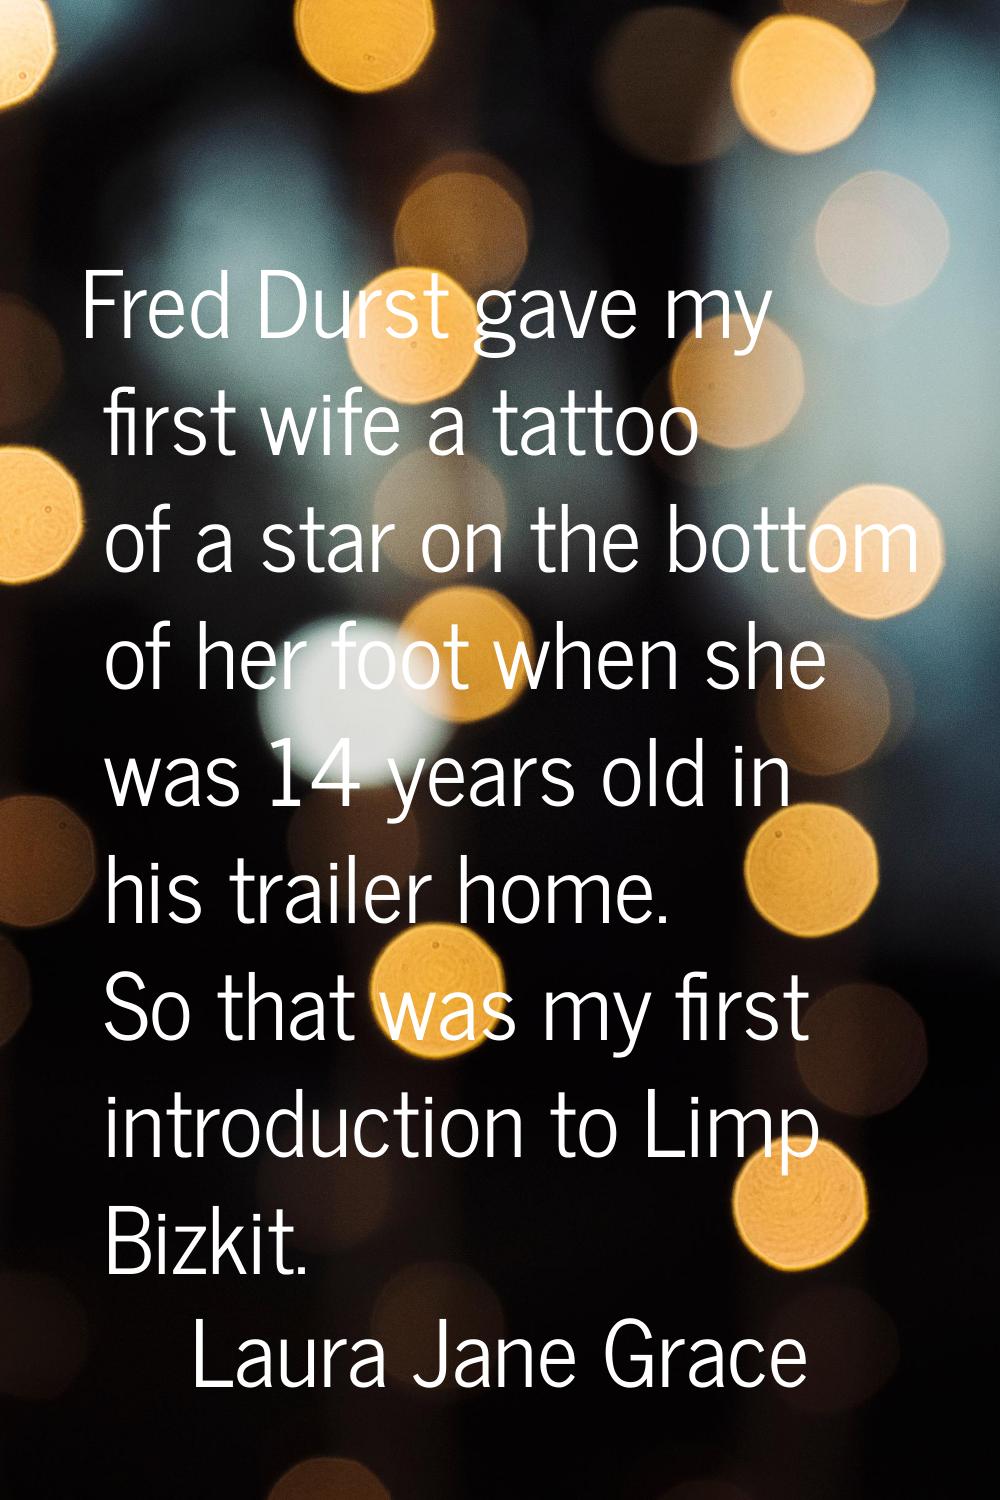 Fred Durst gave my first wife a tattoo of a star on the bottom of her foot when she was 14 years ol